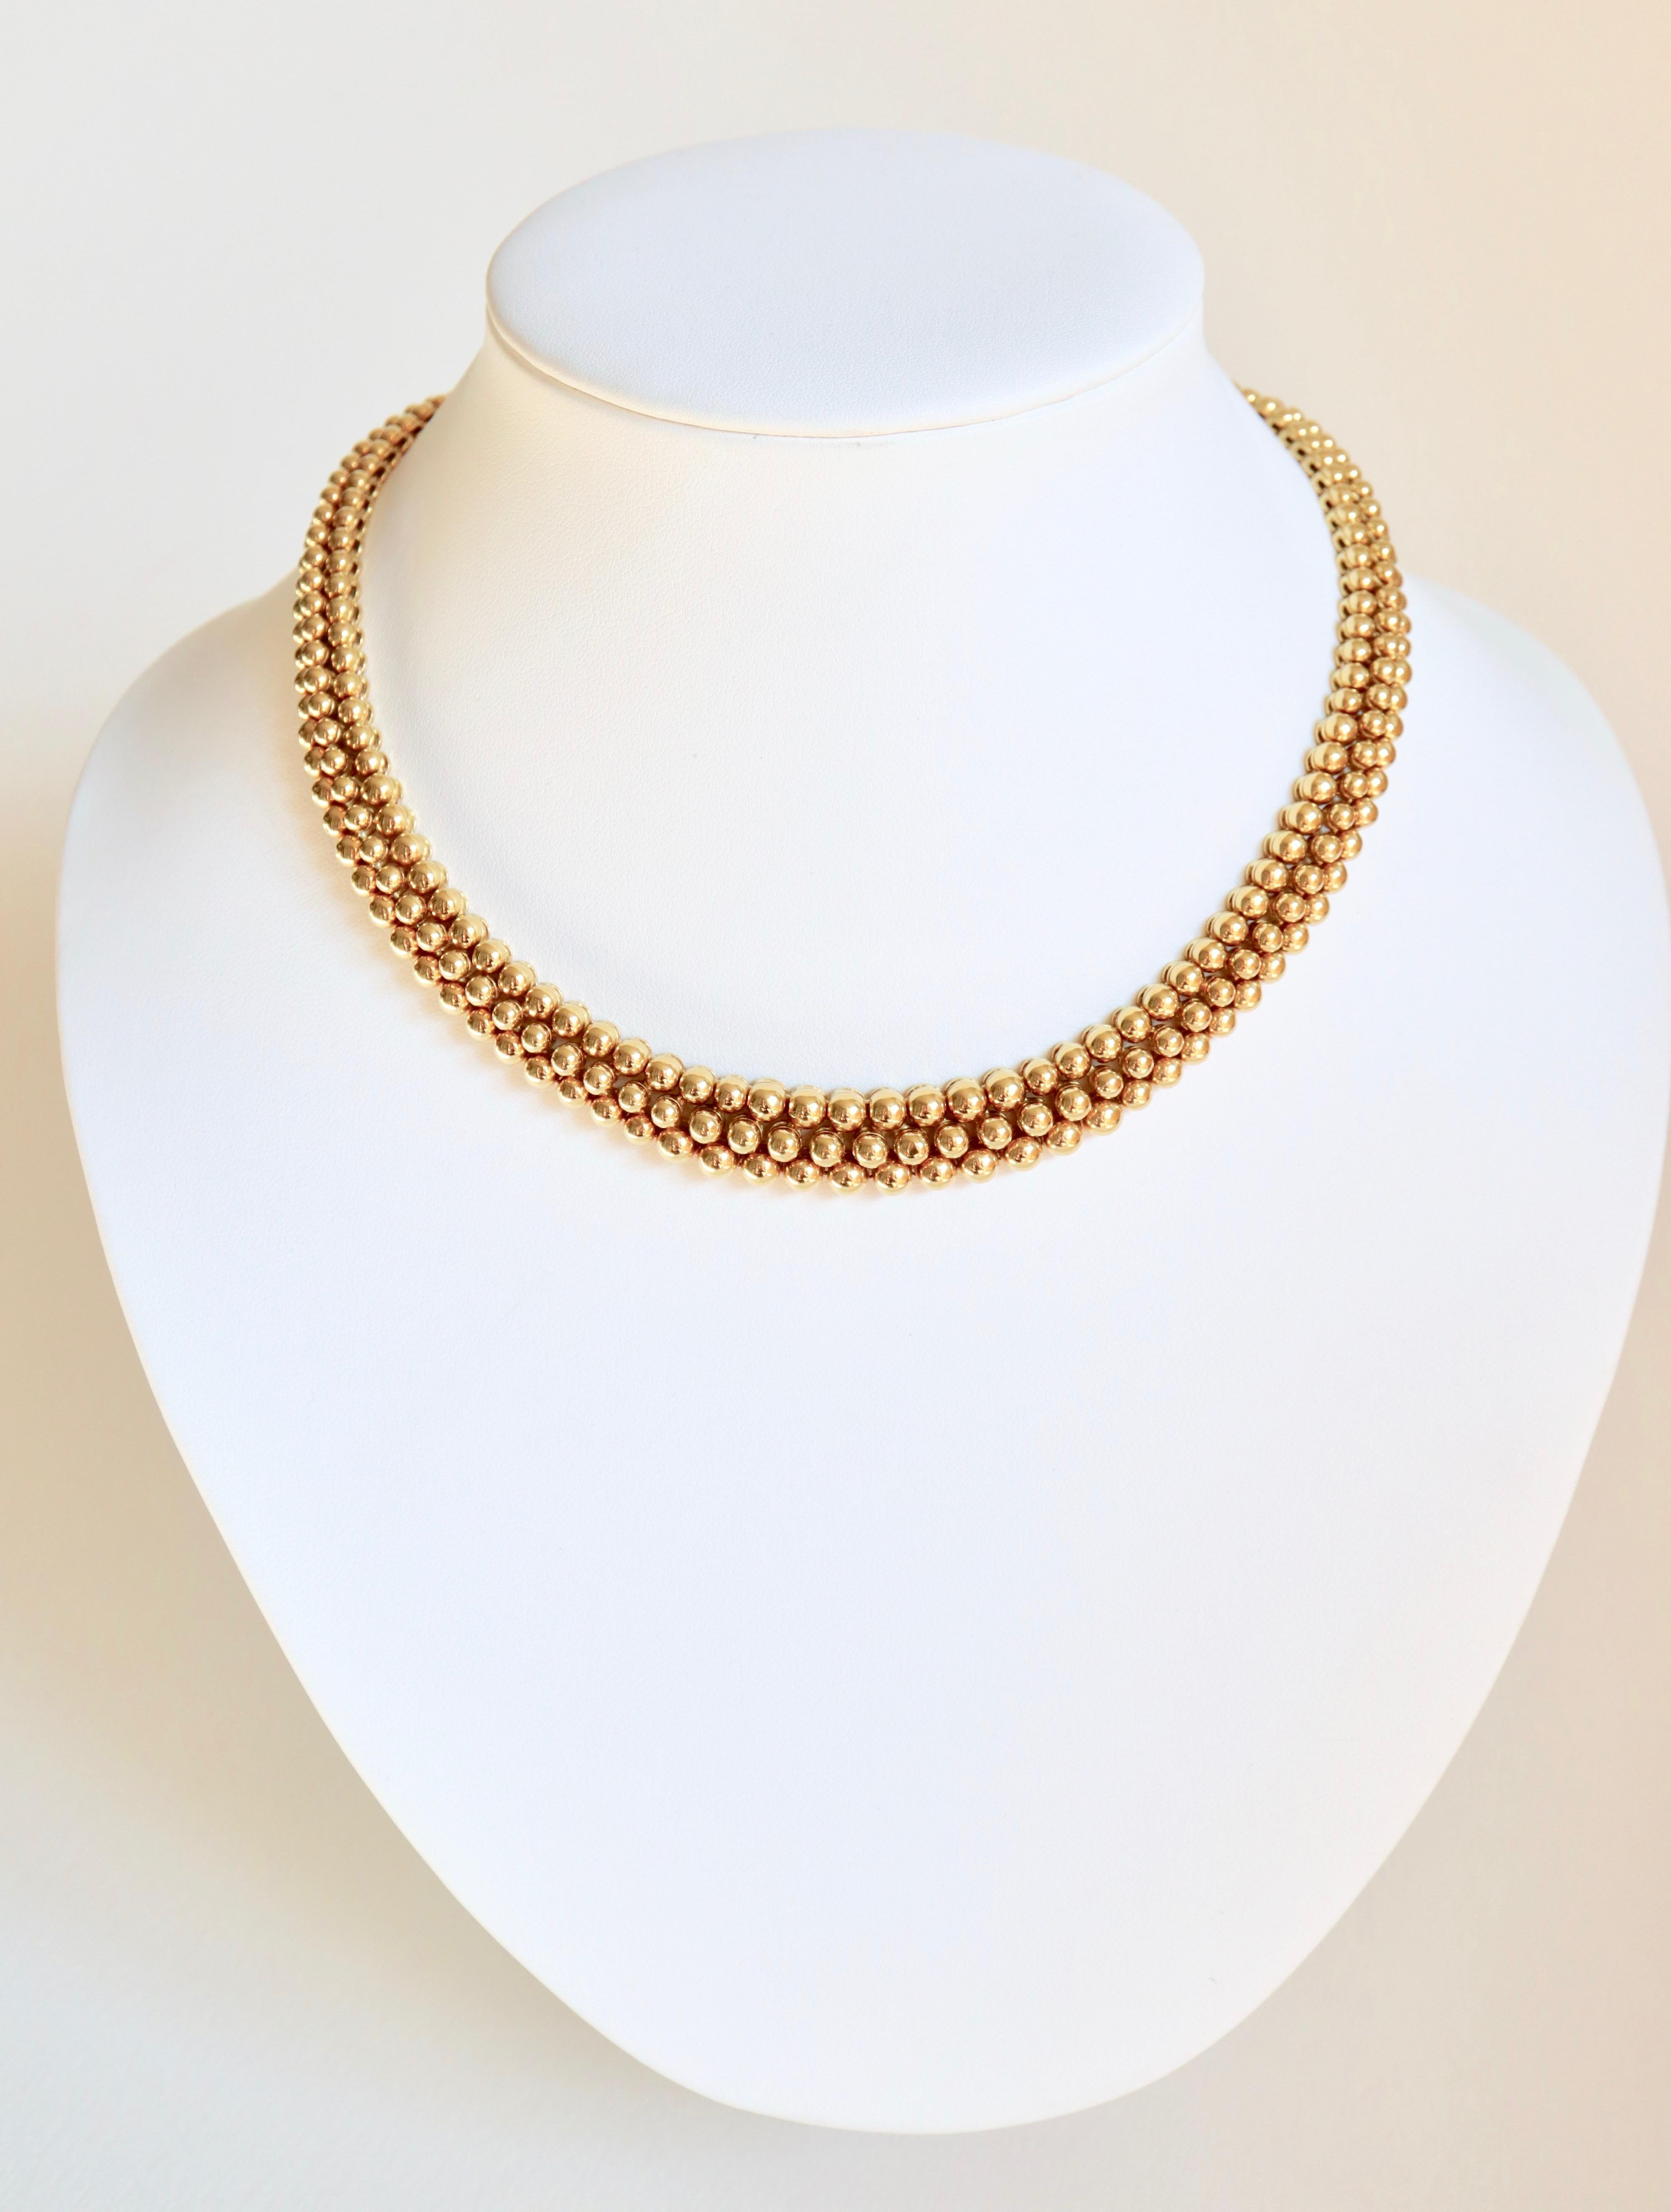 BOUCHERON Necklace in 18 Carat yellow Gold forming a Ribbon of 3 Rows of gold Balls.
Signed Boucheron and Numbered. Safety Ratchet
Length: 37.5 cm Width: 1.1 cm on the Front
Gold weight: 97.9 g